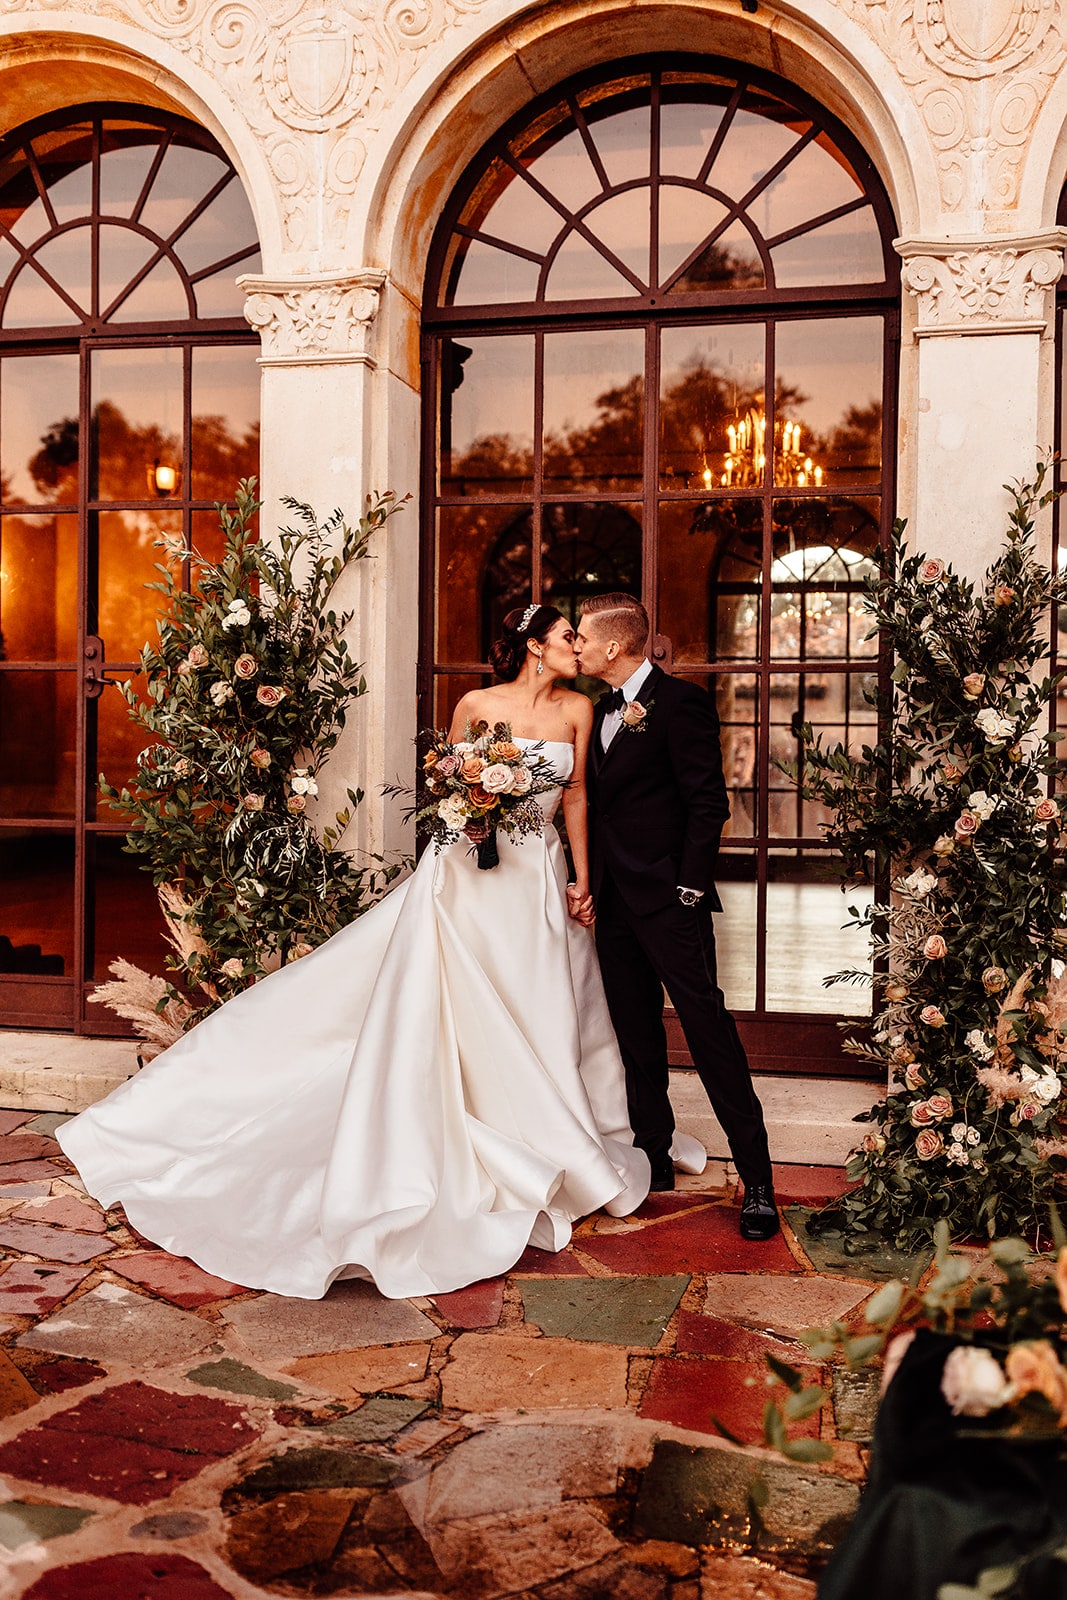 Emerald Wedding Styled Shoot @ The Howey Mansion